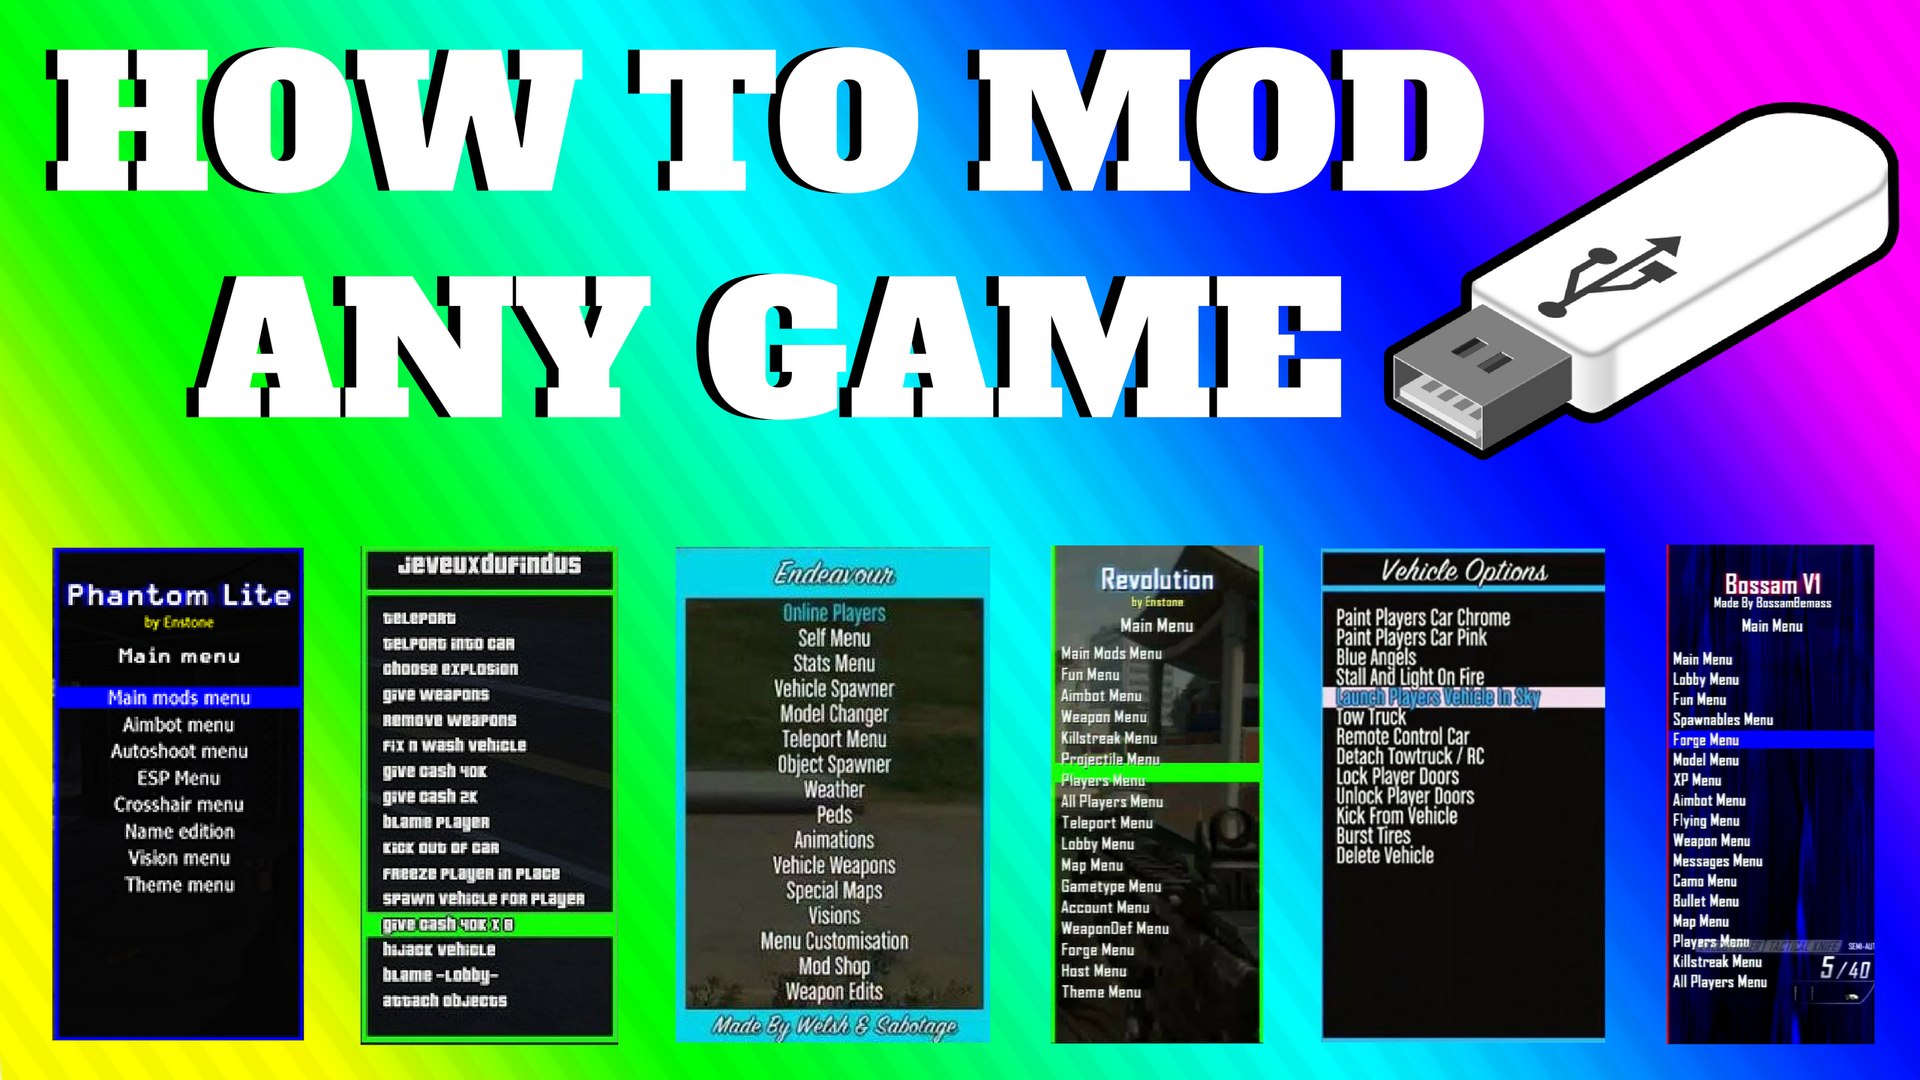 Rijd weg Situatie Renovatie How to Install Mod Menus for any Game 2017! - video Dailymotion